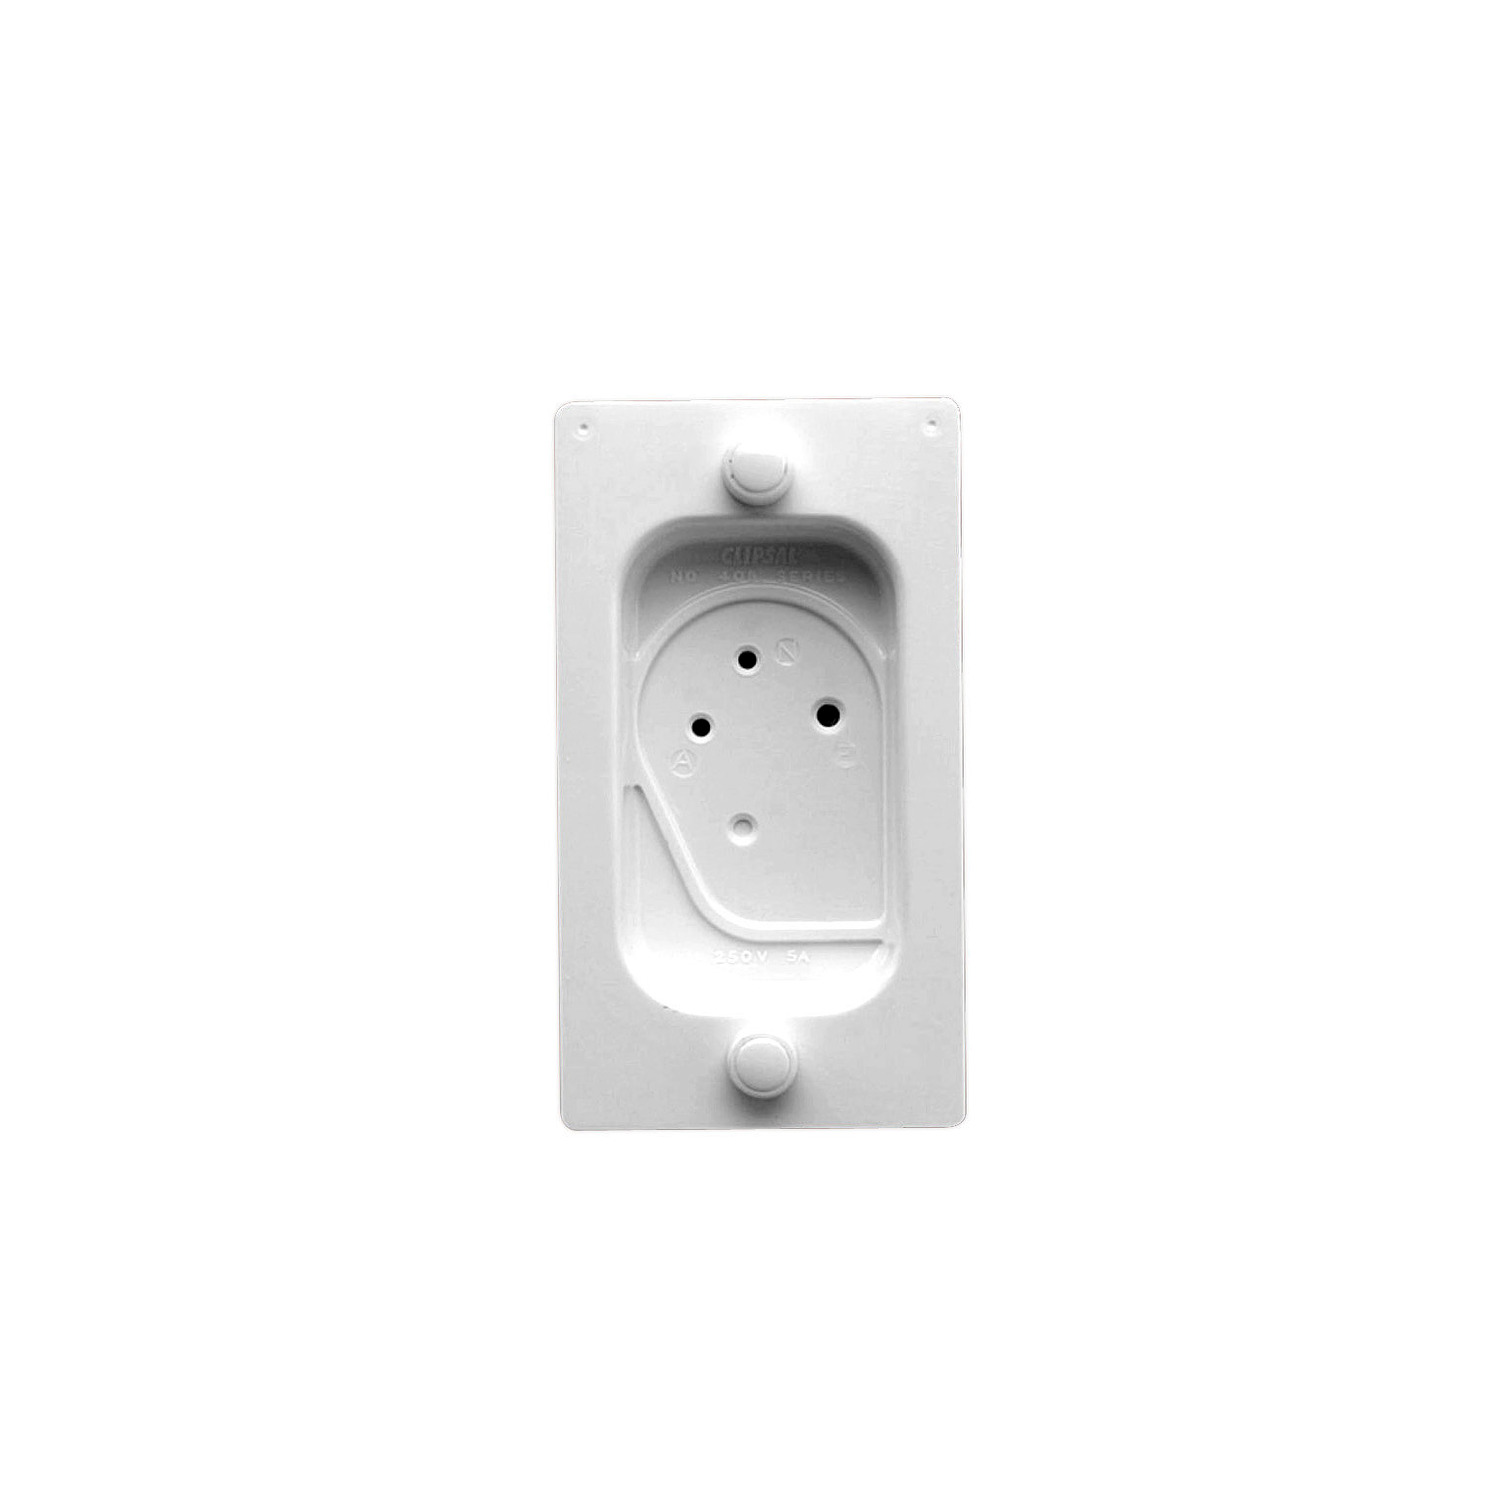 Clock Point Recessed, Unswitched Sockets, 250V, 5A, 50Hz, 3 pin